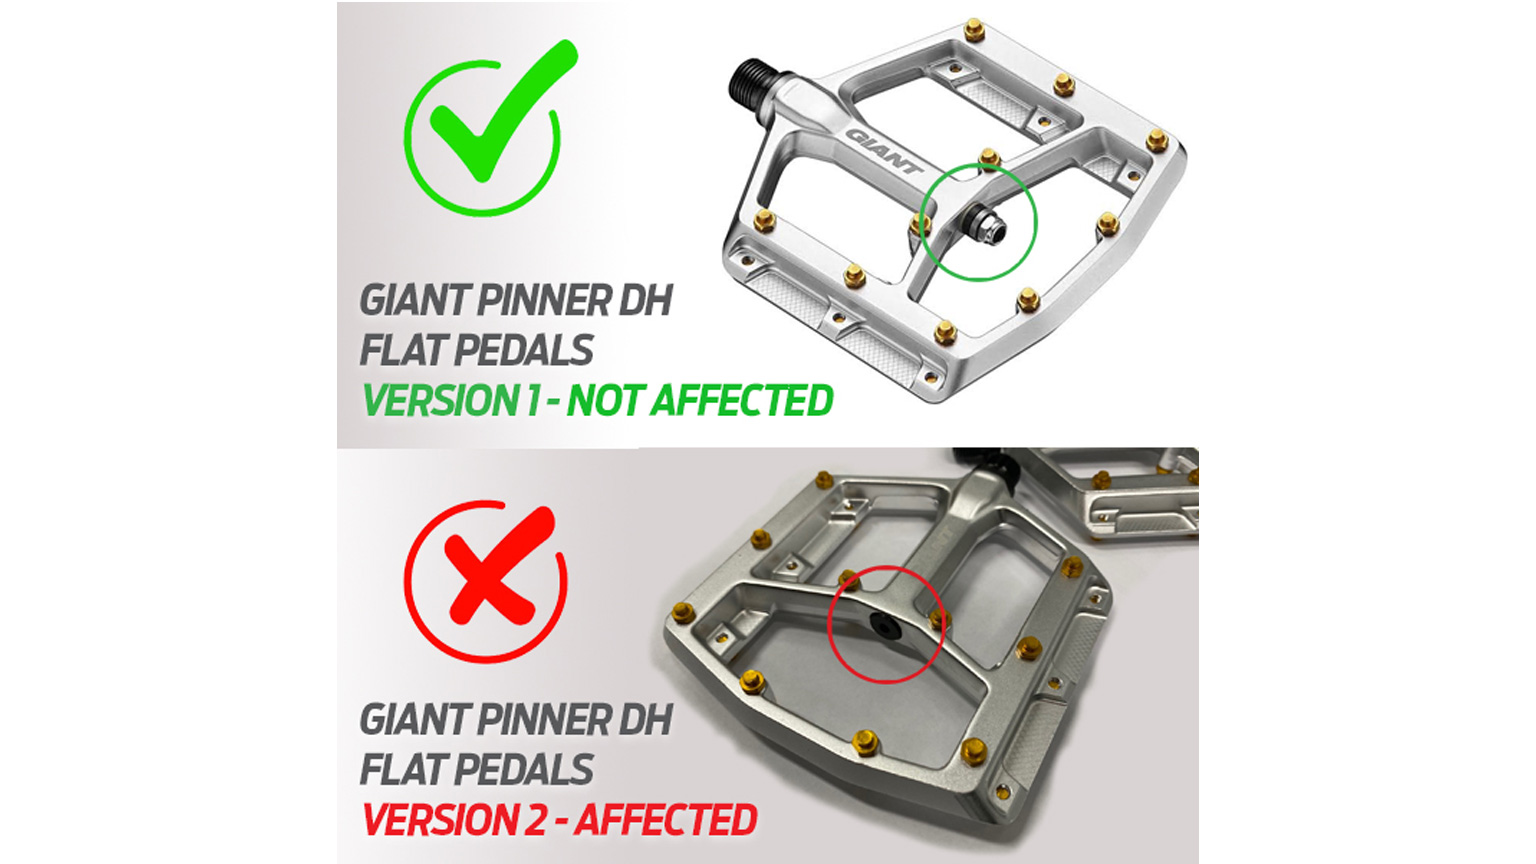 Pinner DH Pedal Recall | Giant Bicycles 